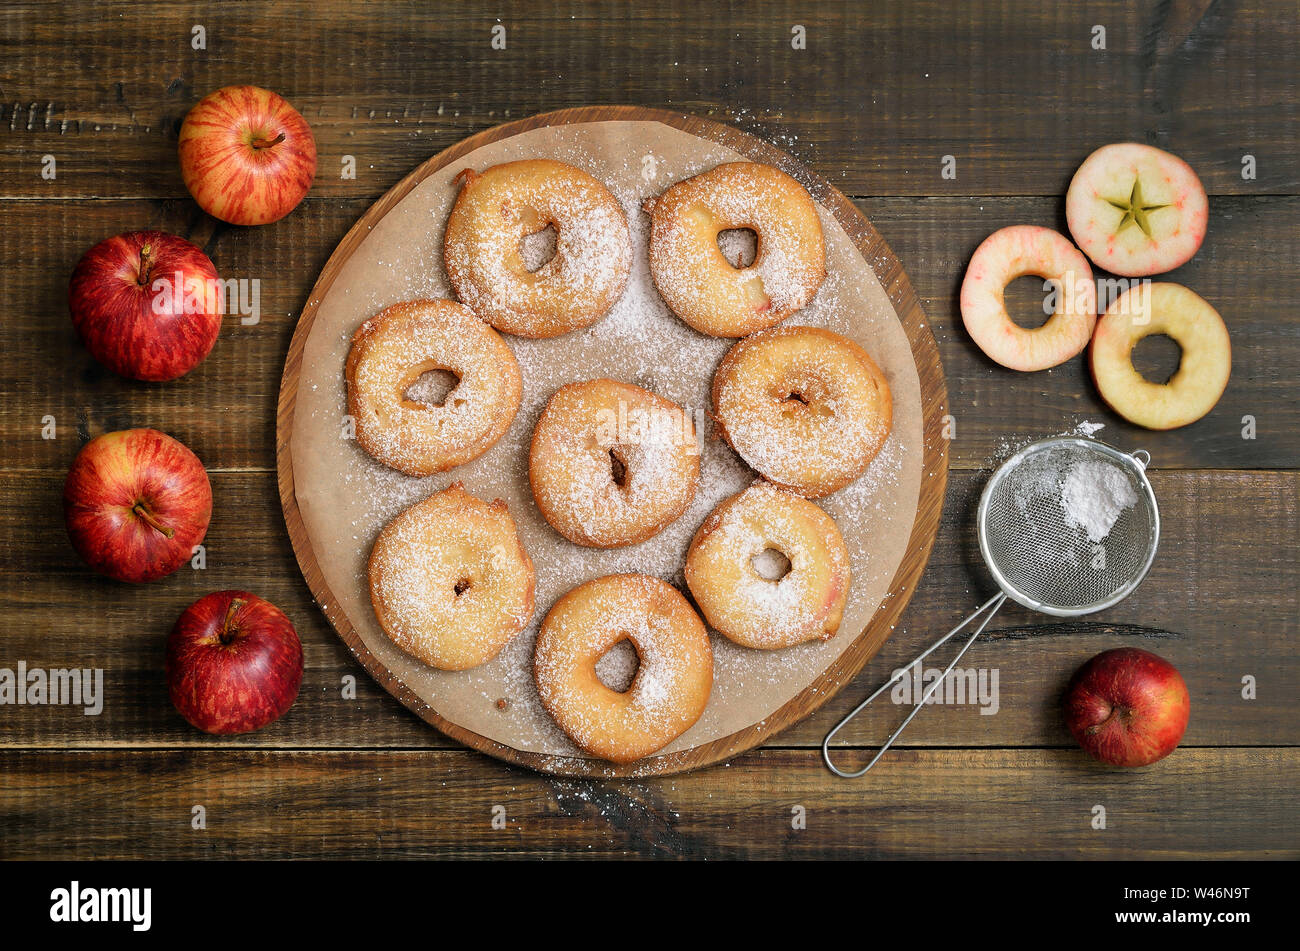 Apple rings and fresh apples on wooden table, top view Stock Photo